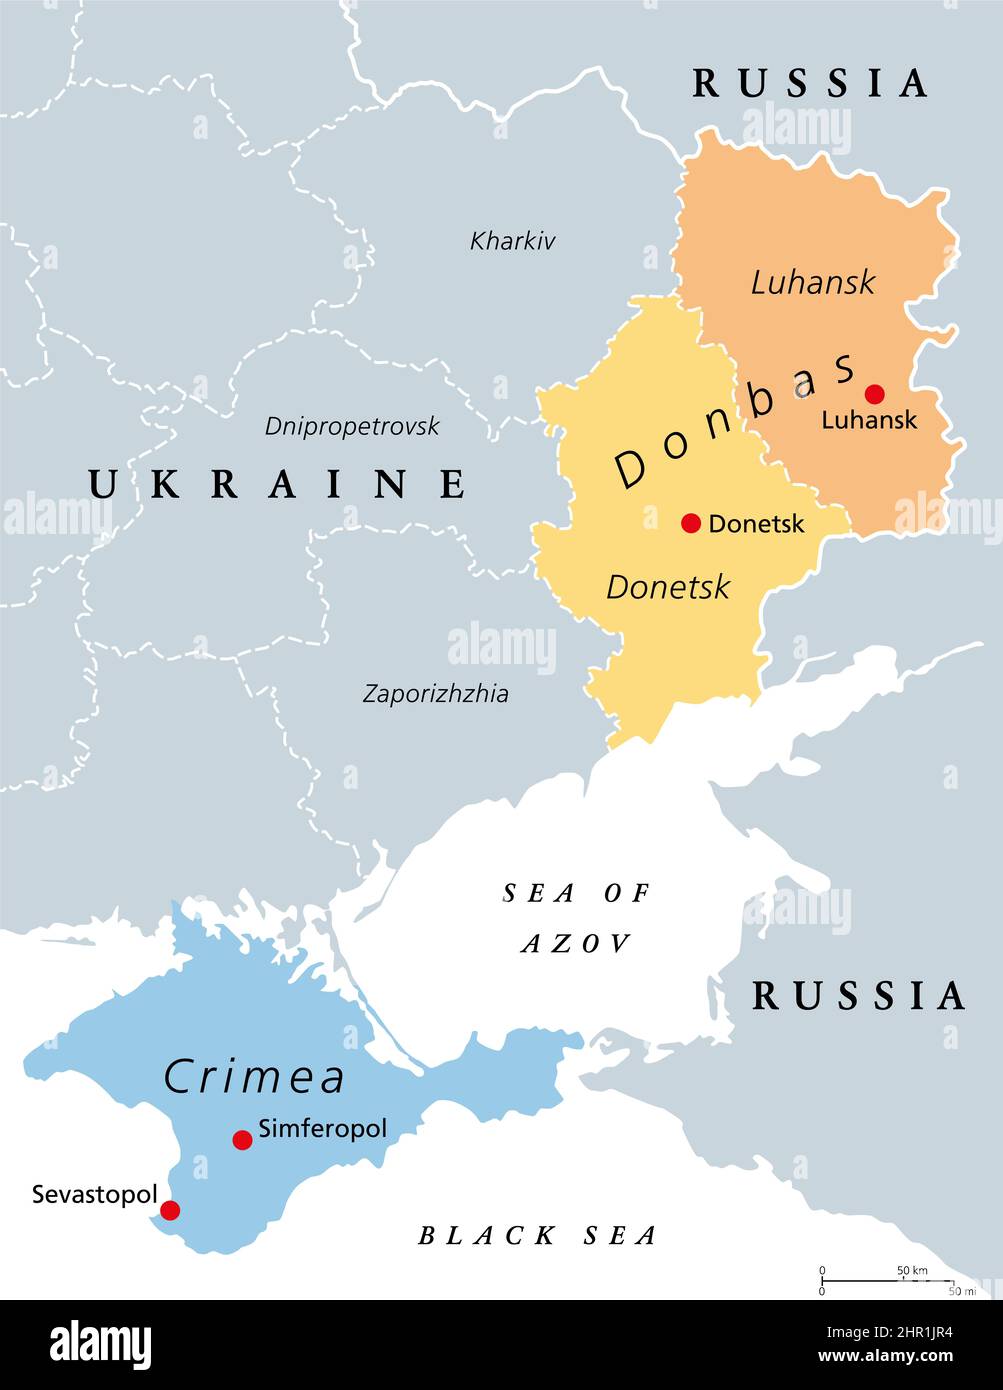 Donbas area and Crimea, Ukraine political map. The disputed areas Crimea peninsula on the coast of Black Sea, and the Donbass region formed by Luhansk. Stock Photo